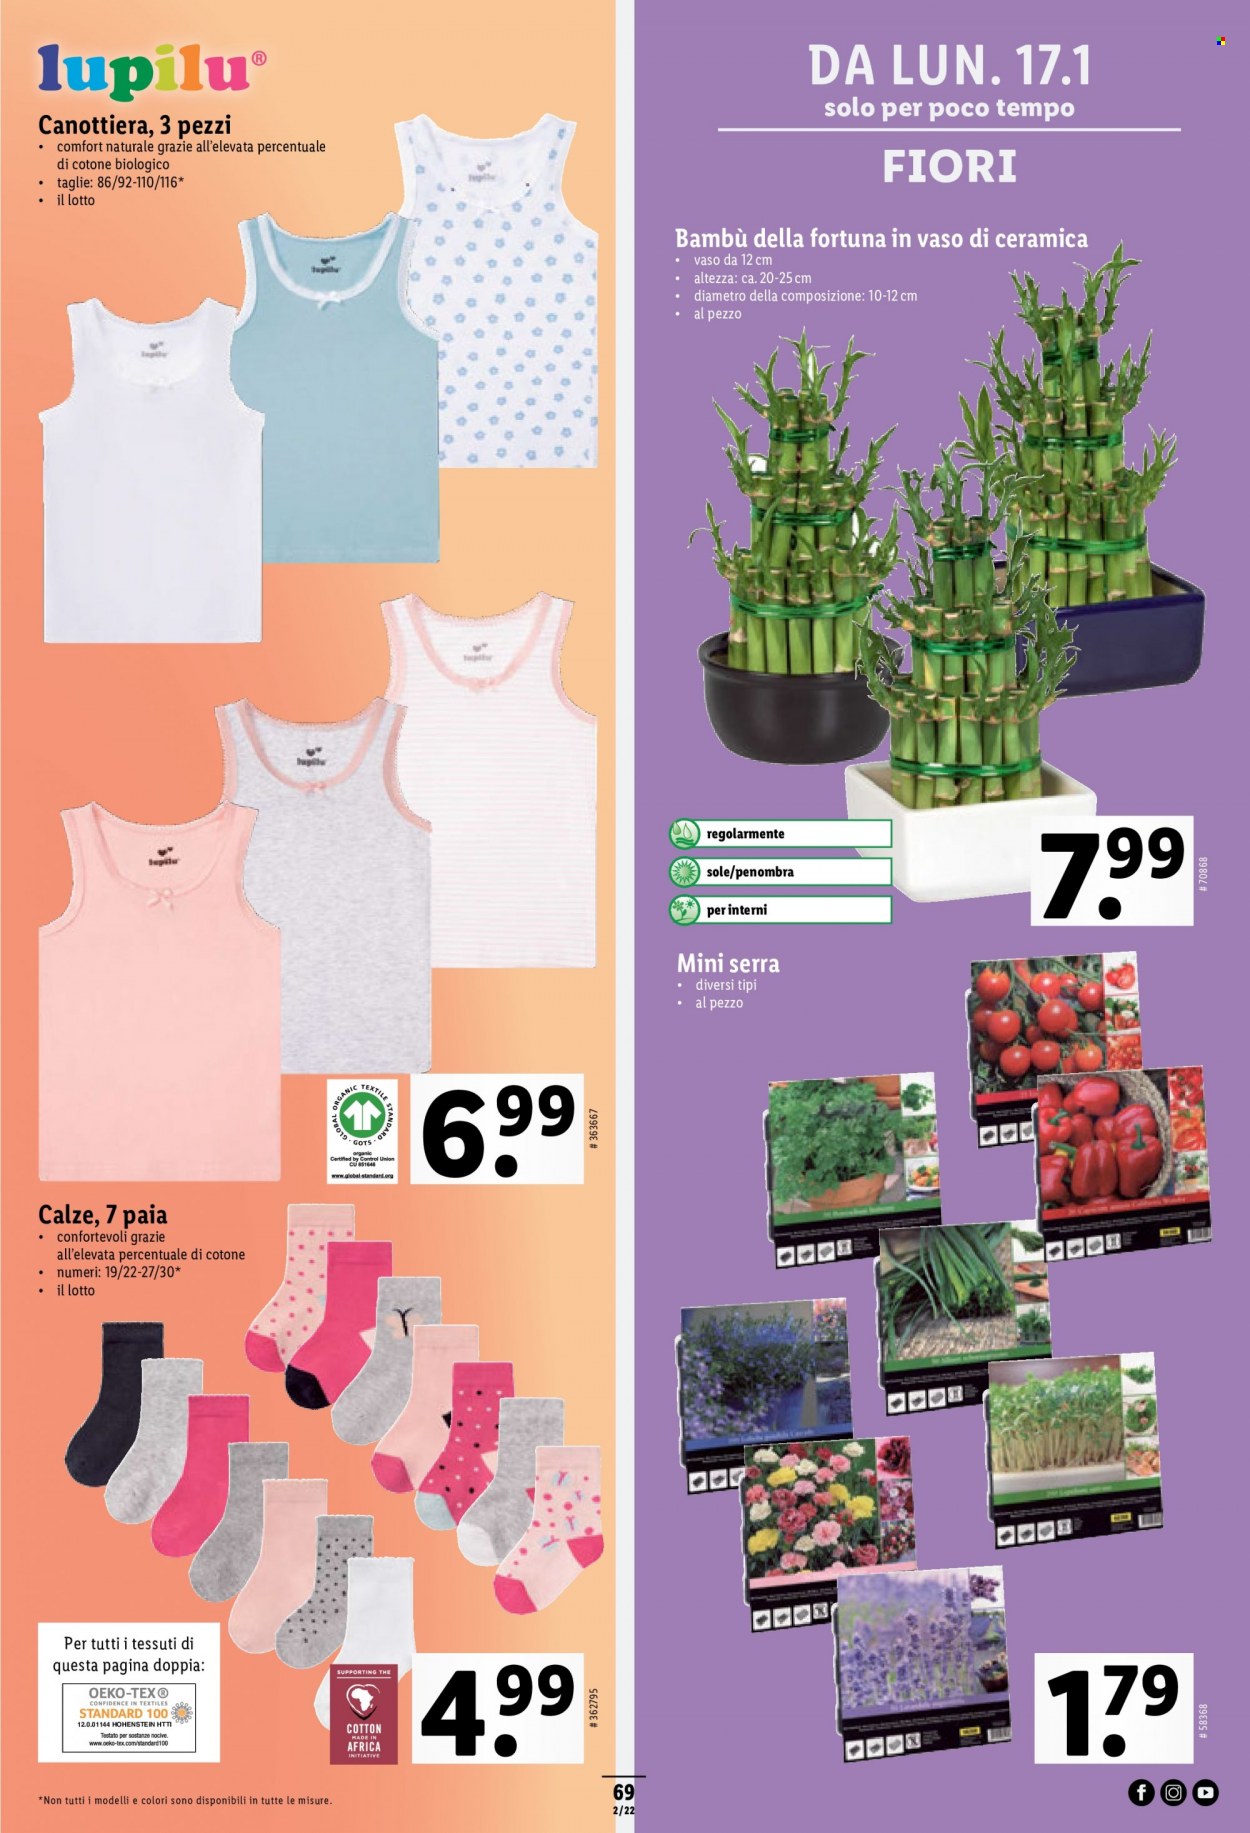 Catalogue Lidl - 13.1.2022 - 19.1.2022. Page 69.